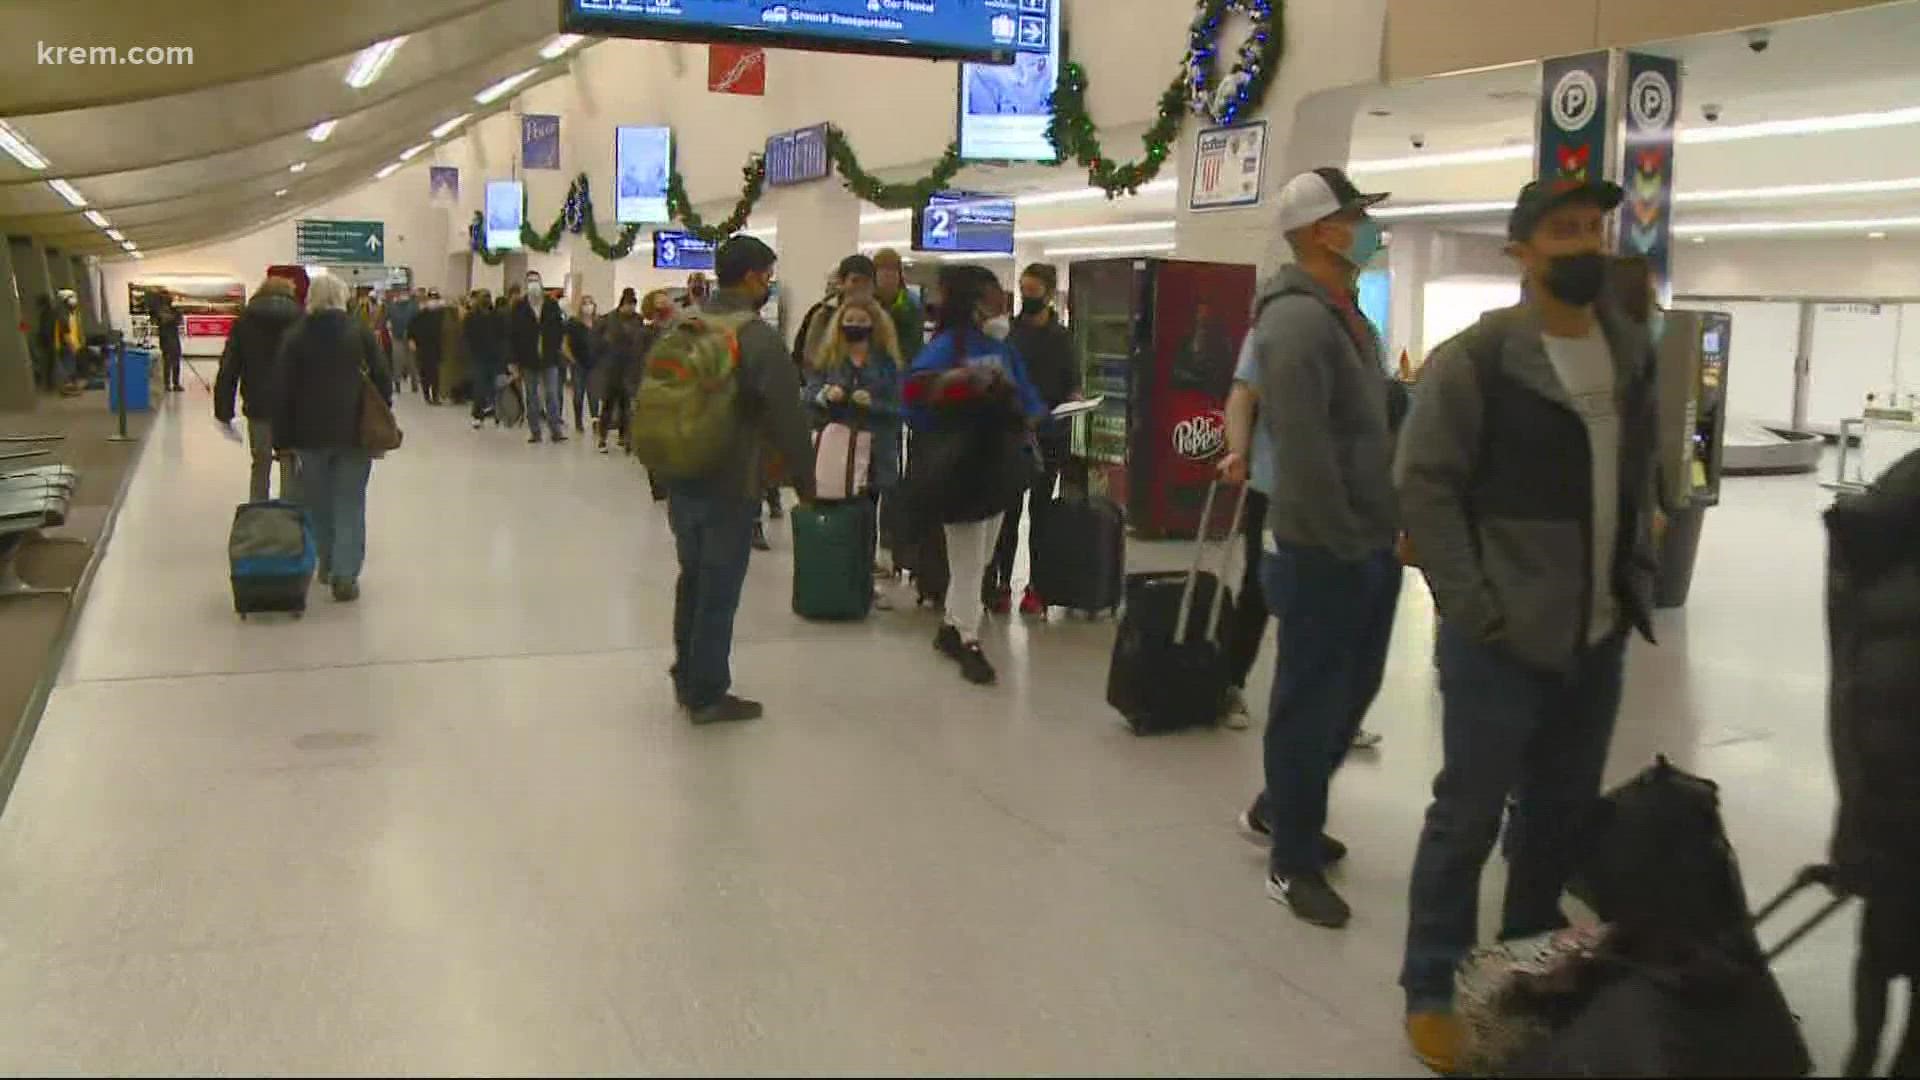 Spokane Airport personnel said the busiest time at the airport will be between 6 to 11 a.m. and 2 to 4 p.m. on Wednesday.